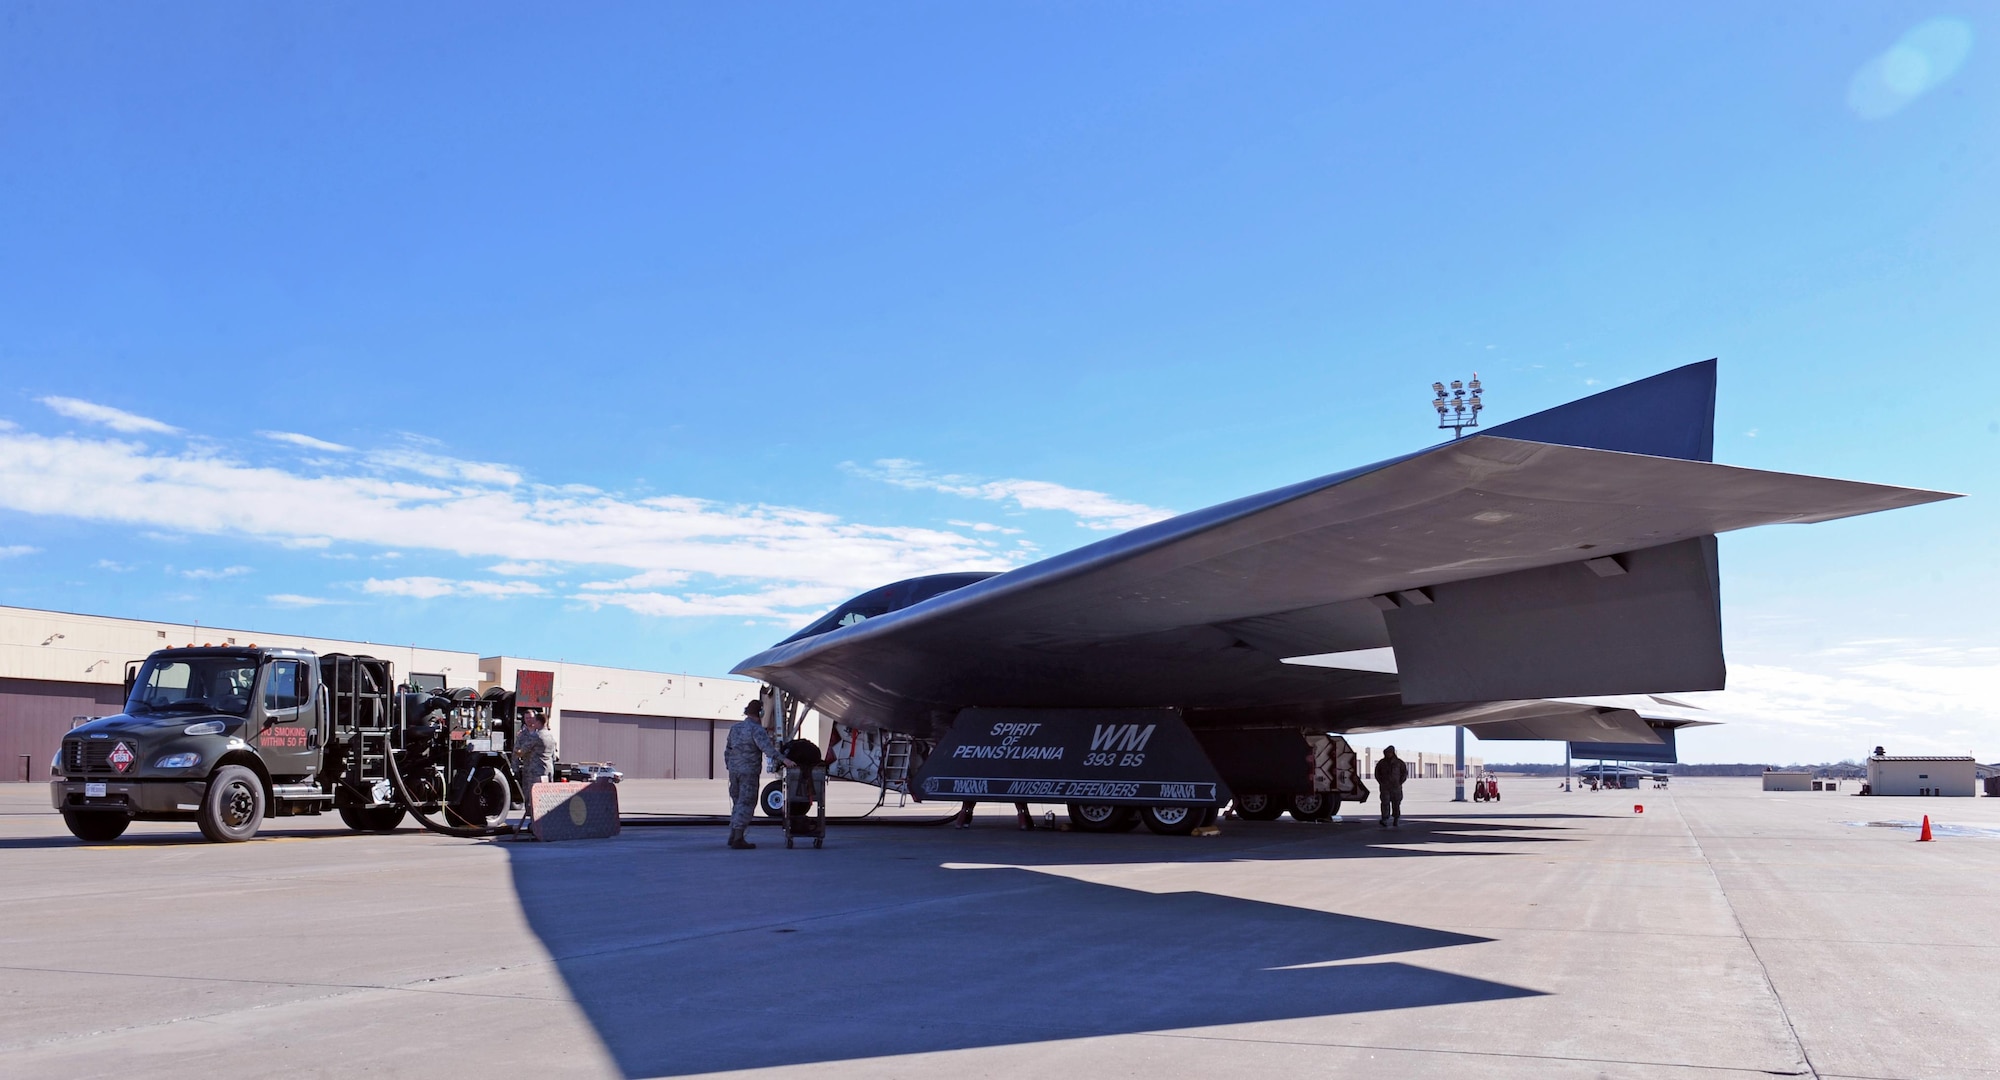 Airmen with the 509th Logistics Readiness Squadron fuels section fuel a B-2 Spirit between flights at Whiteman Air Force Base, Mo., Feb. 2, 2016, during Red Flag (RF) 16-1 exercise. RF, held at Nellis AFB, Nev., is a realistic combat training exercise involving the air, space and cyber forces of the U.S. and its allies. (U.S. Air Force photo by Tech. Sgt. Miguel Lara III)